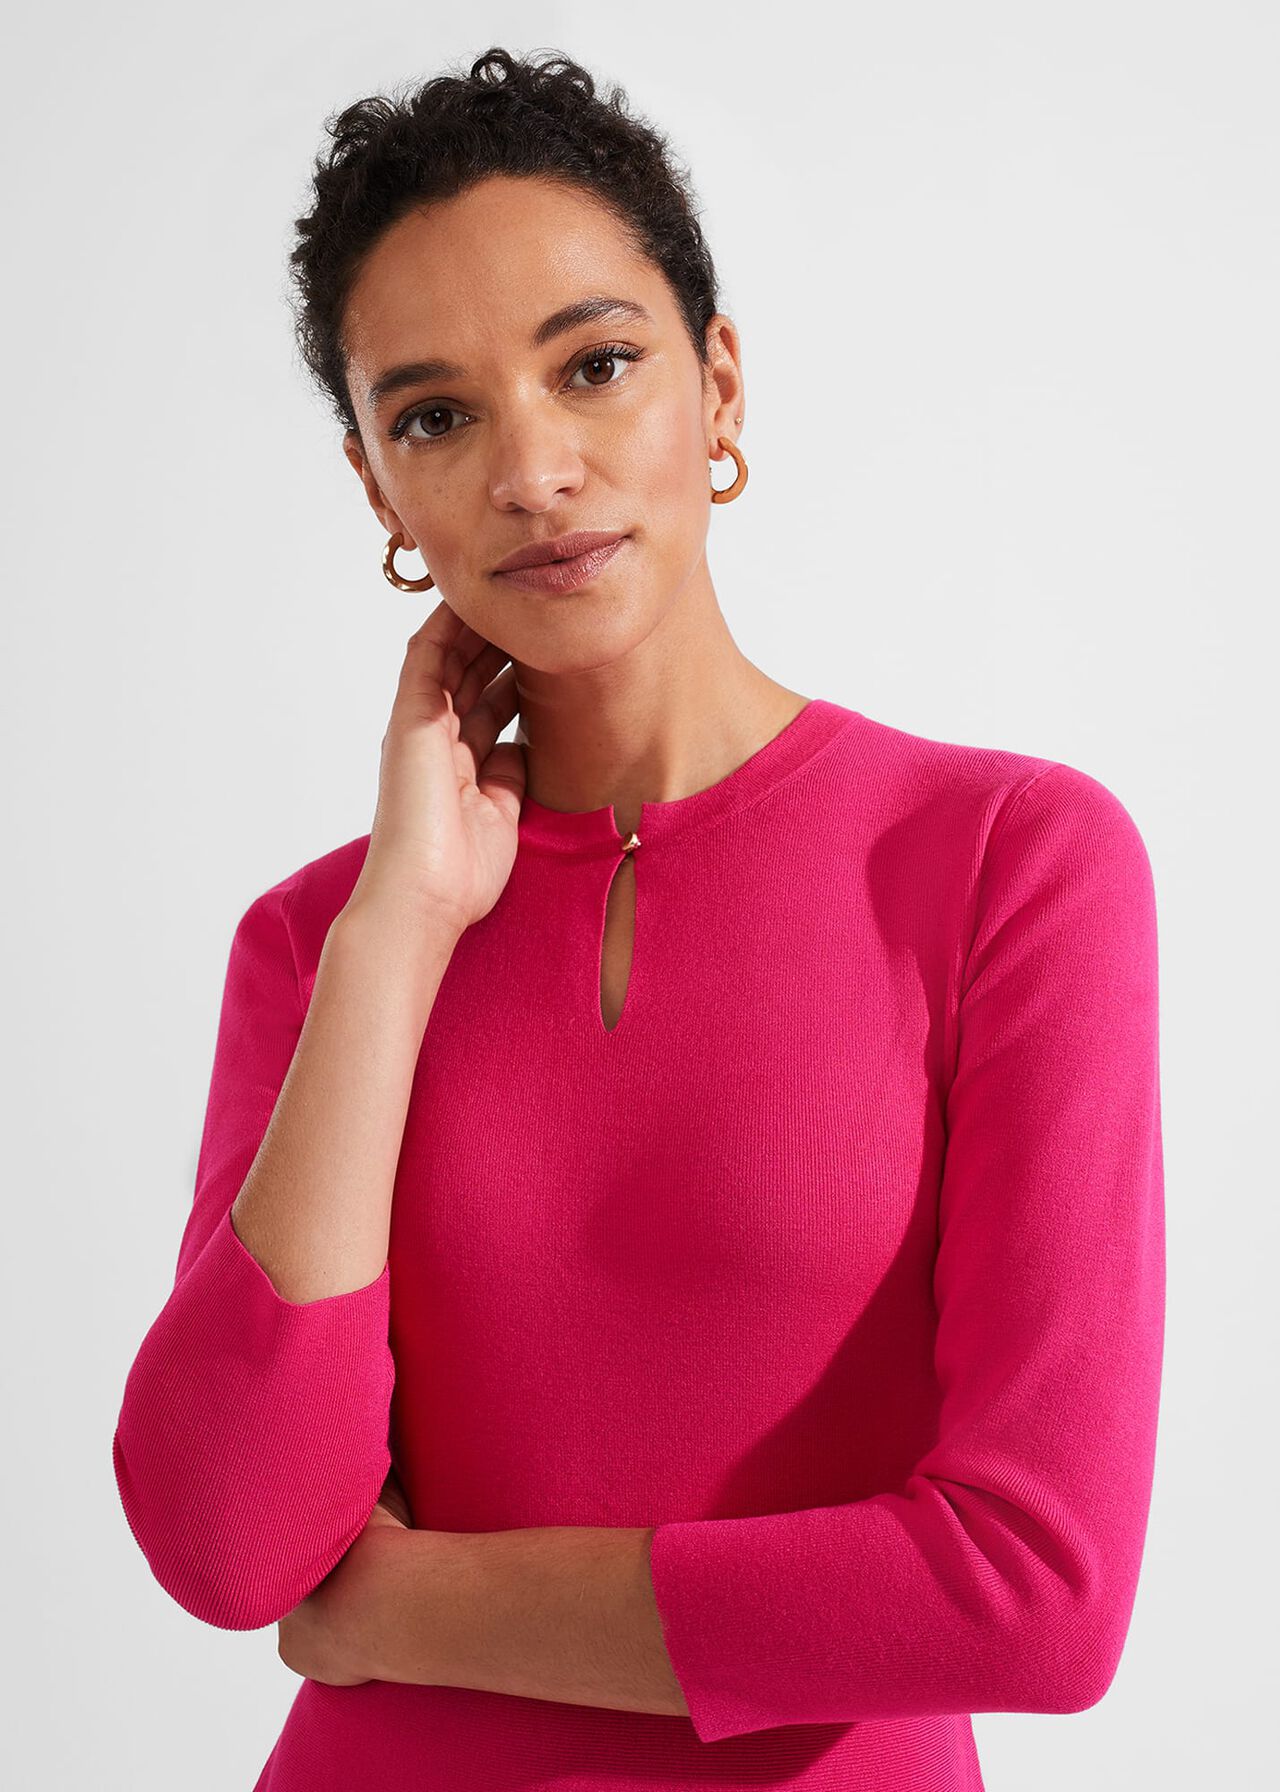 Hailey Knitted Dress, Sapphire Pink, hi-res